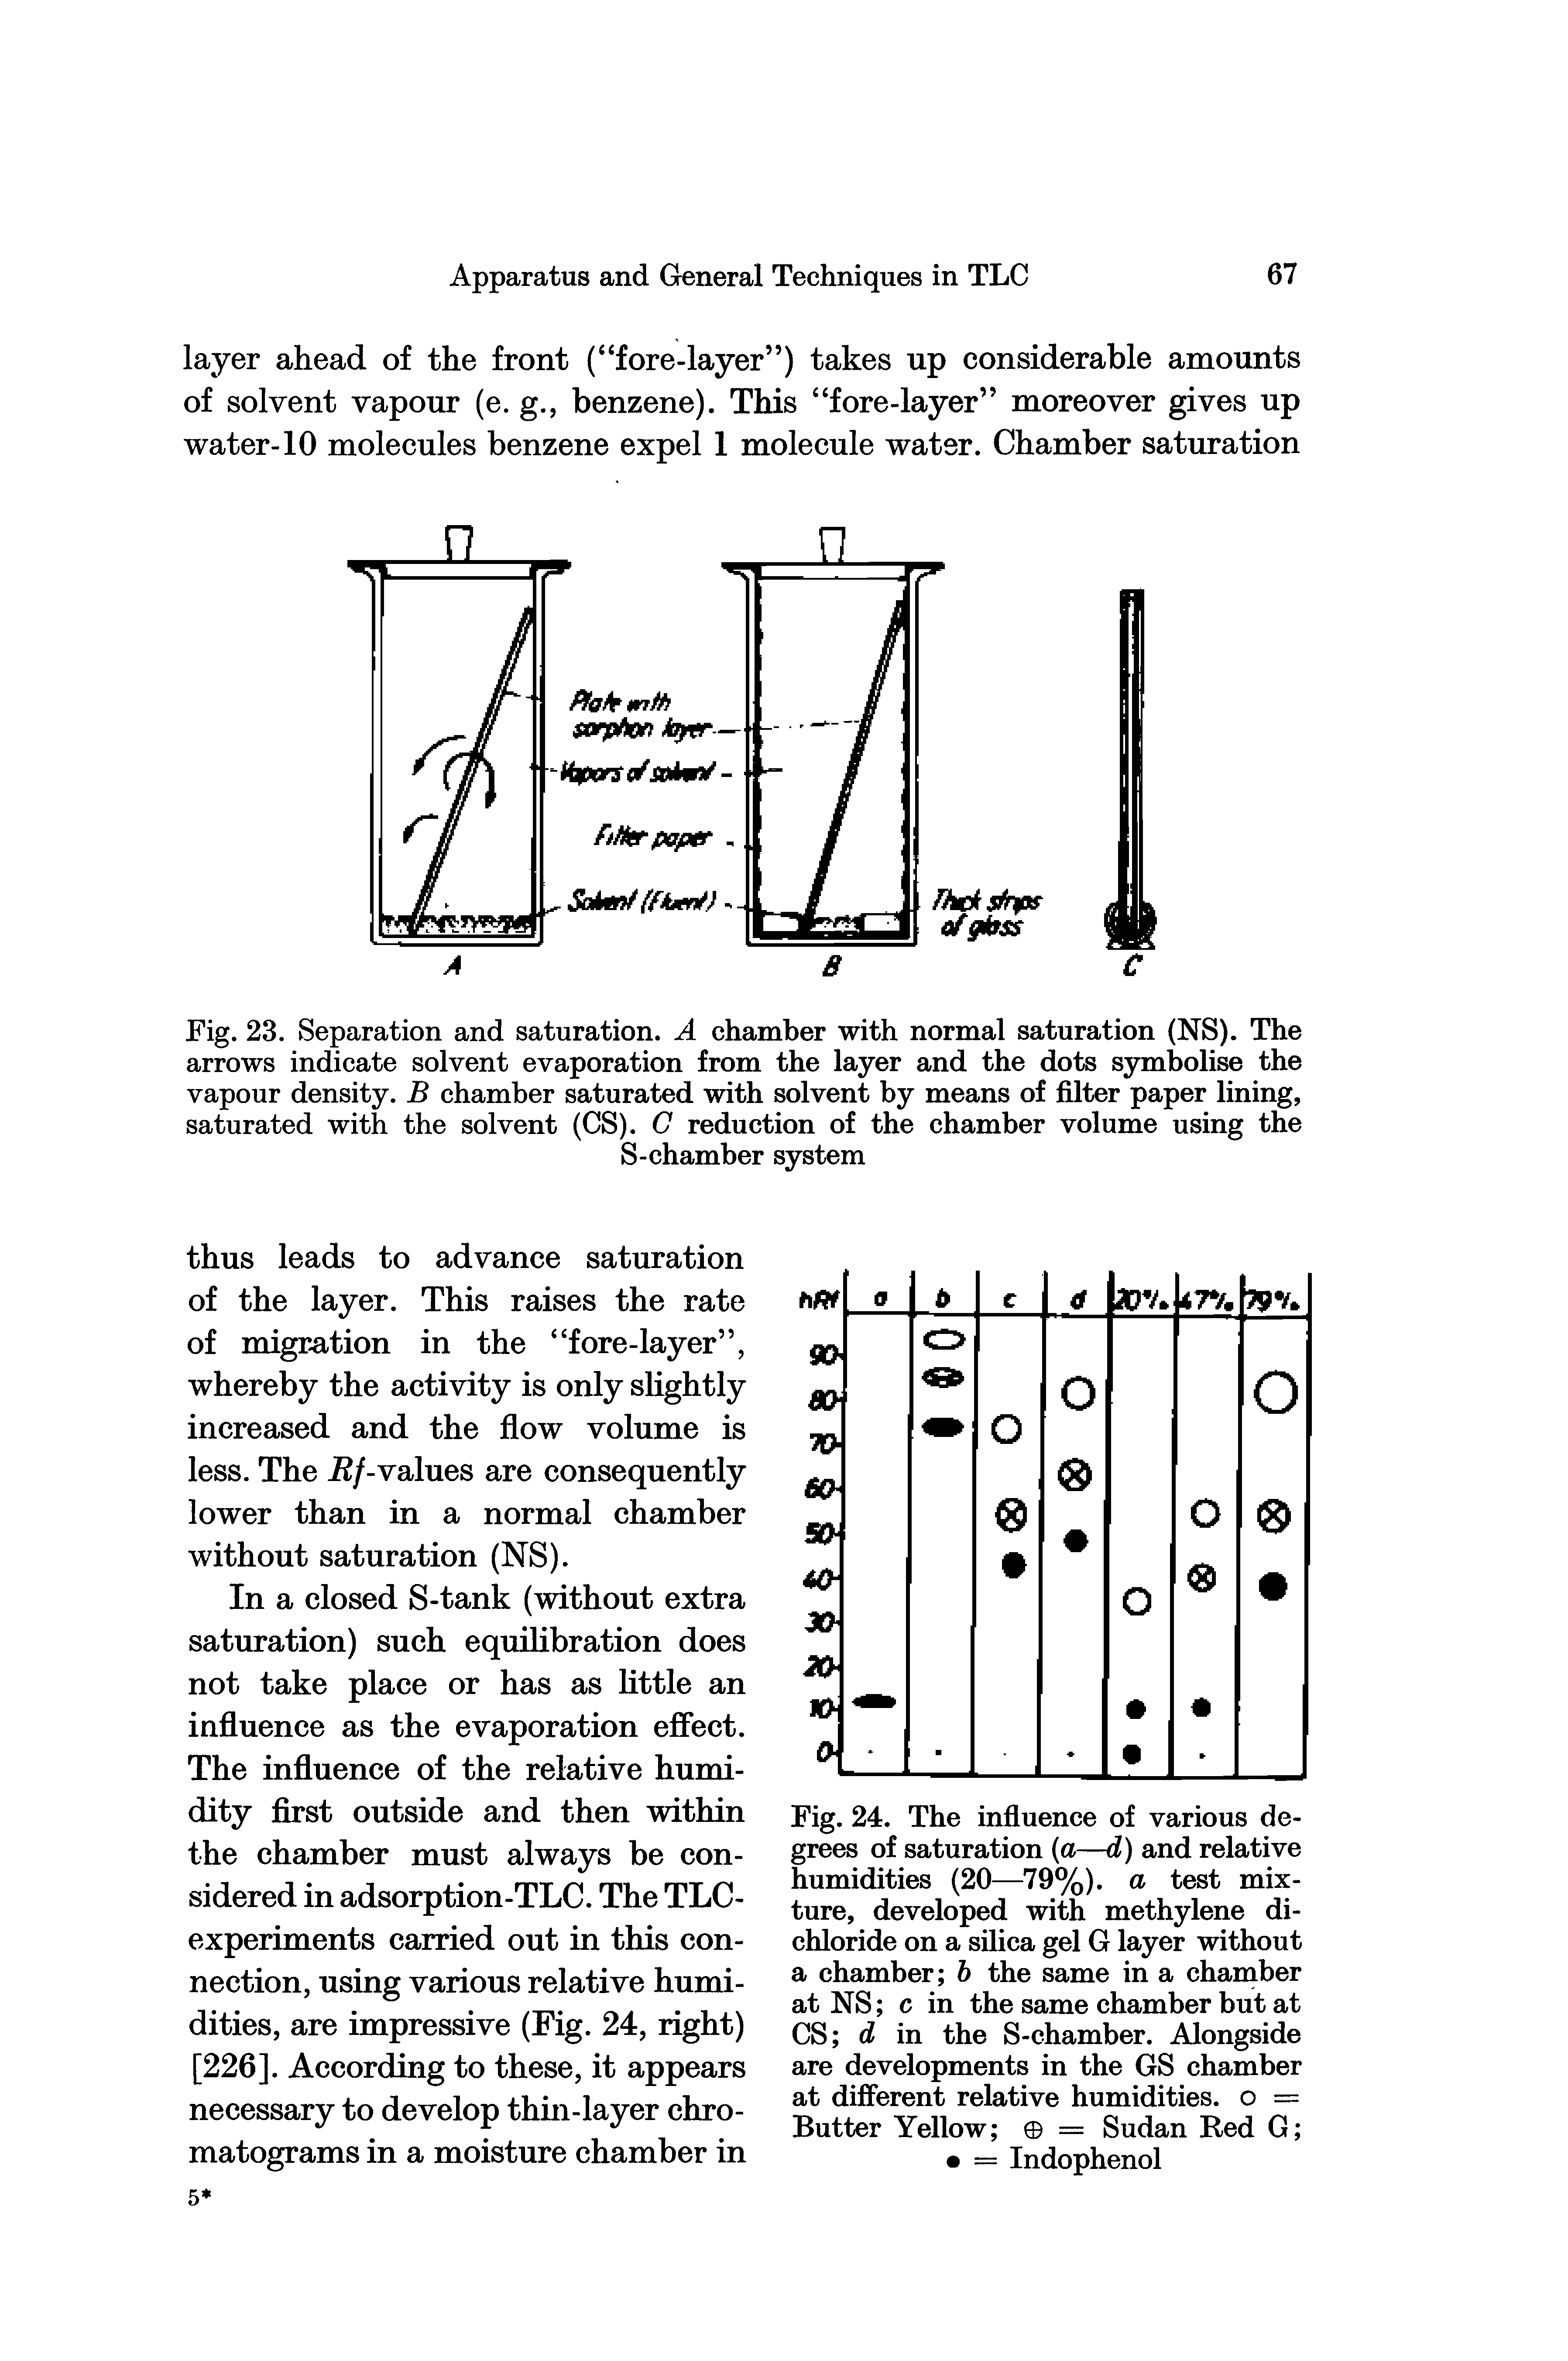 Fig. 23. Separation and saturation. A chamber with normal saturation (NS). The arrows indicate solvent evaporation from the layer and the dots symbolise the vapour density. B chamber saturated with solvent by means of filter paper lining, saturated with the solvent (CS). C reduction of the chamber volume using the...